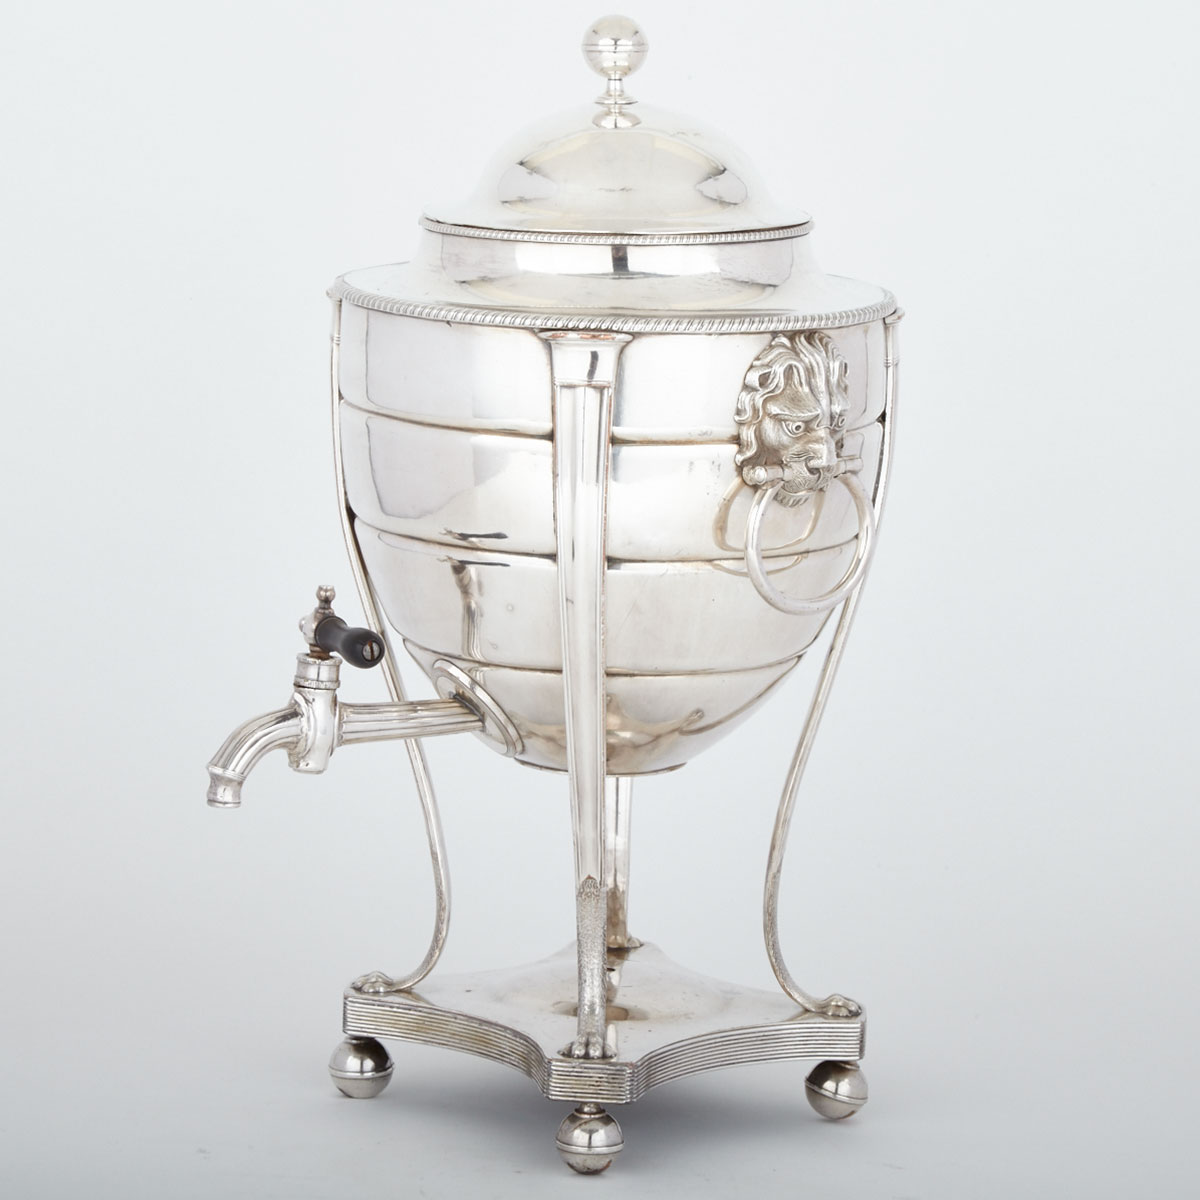 Old Sheffield Plate Tea Urn, early 19th century